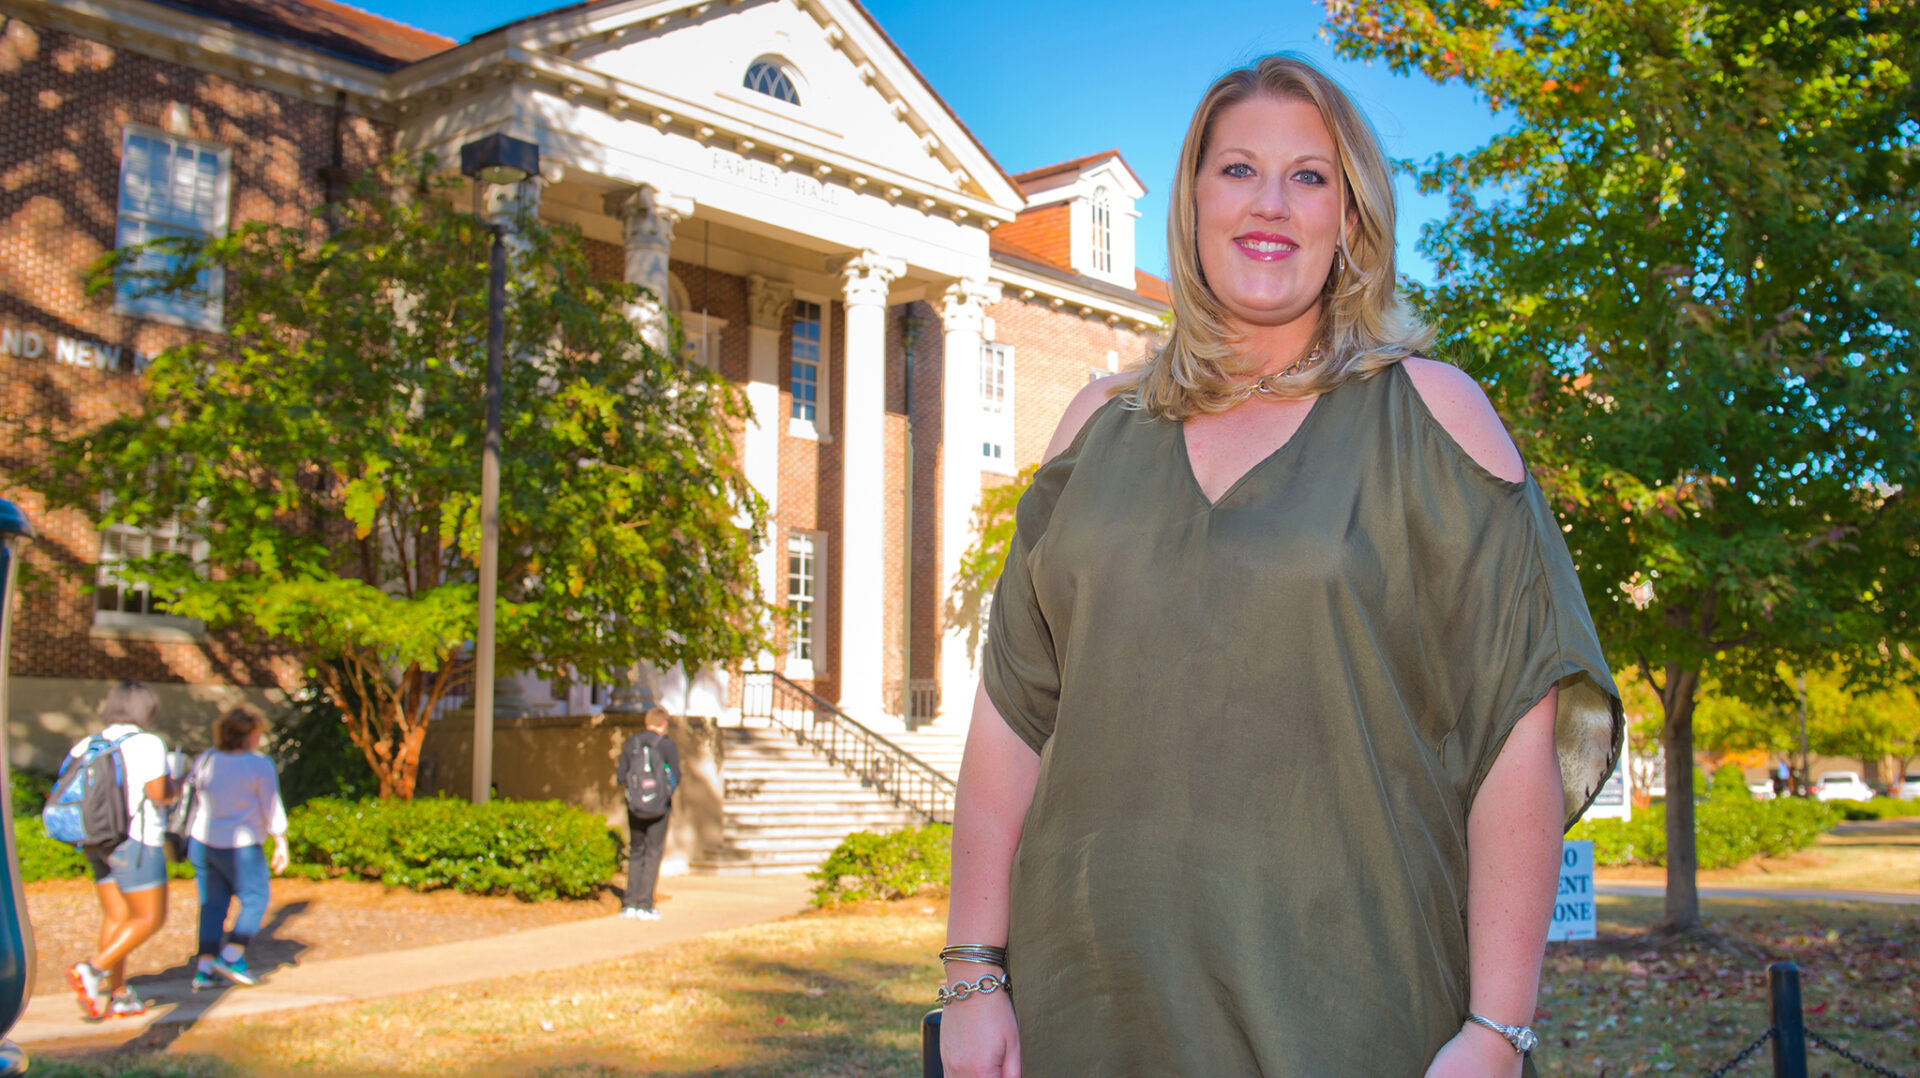 With her recent gift to the UM Meek School of Journalism and New Media, Meghan Cease wants to give students opportunities to learn beyond the classroom. Photo by Bill Dabney